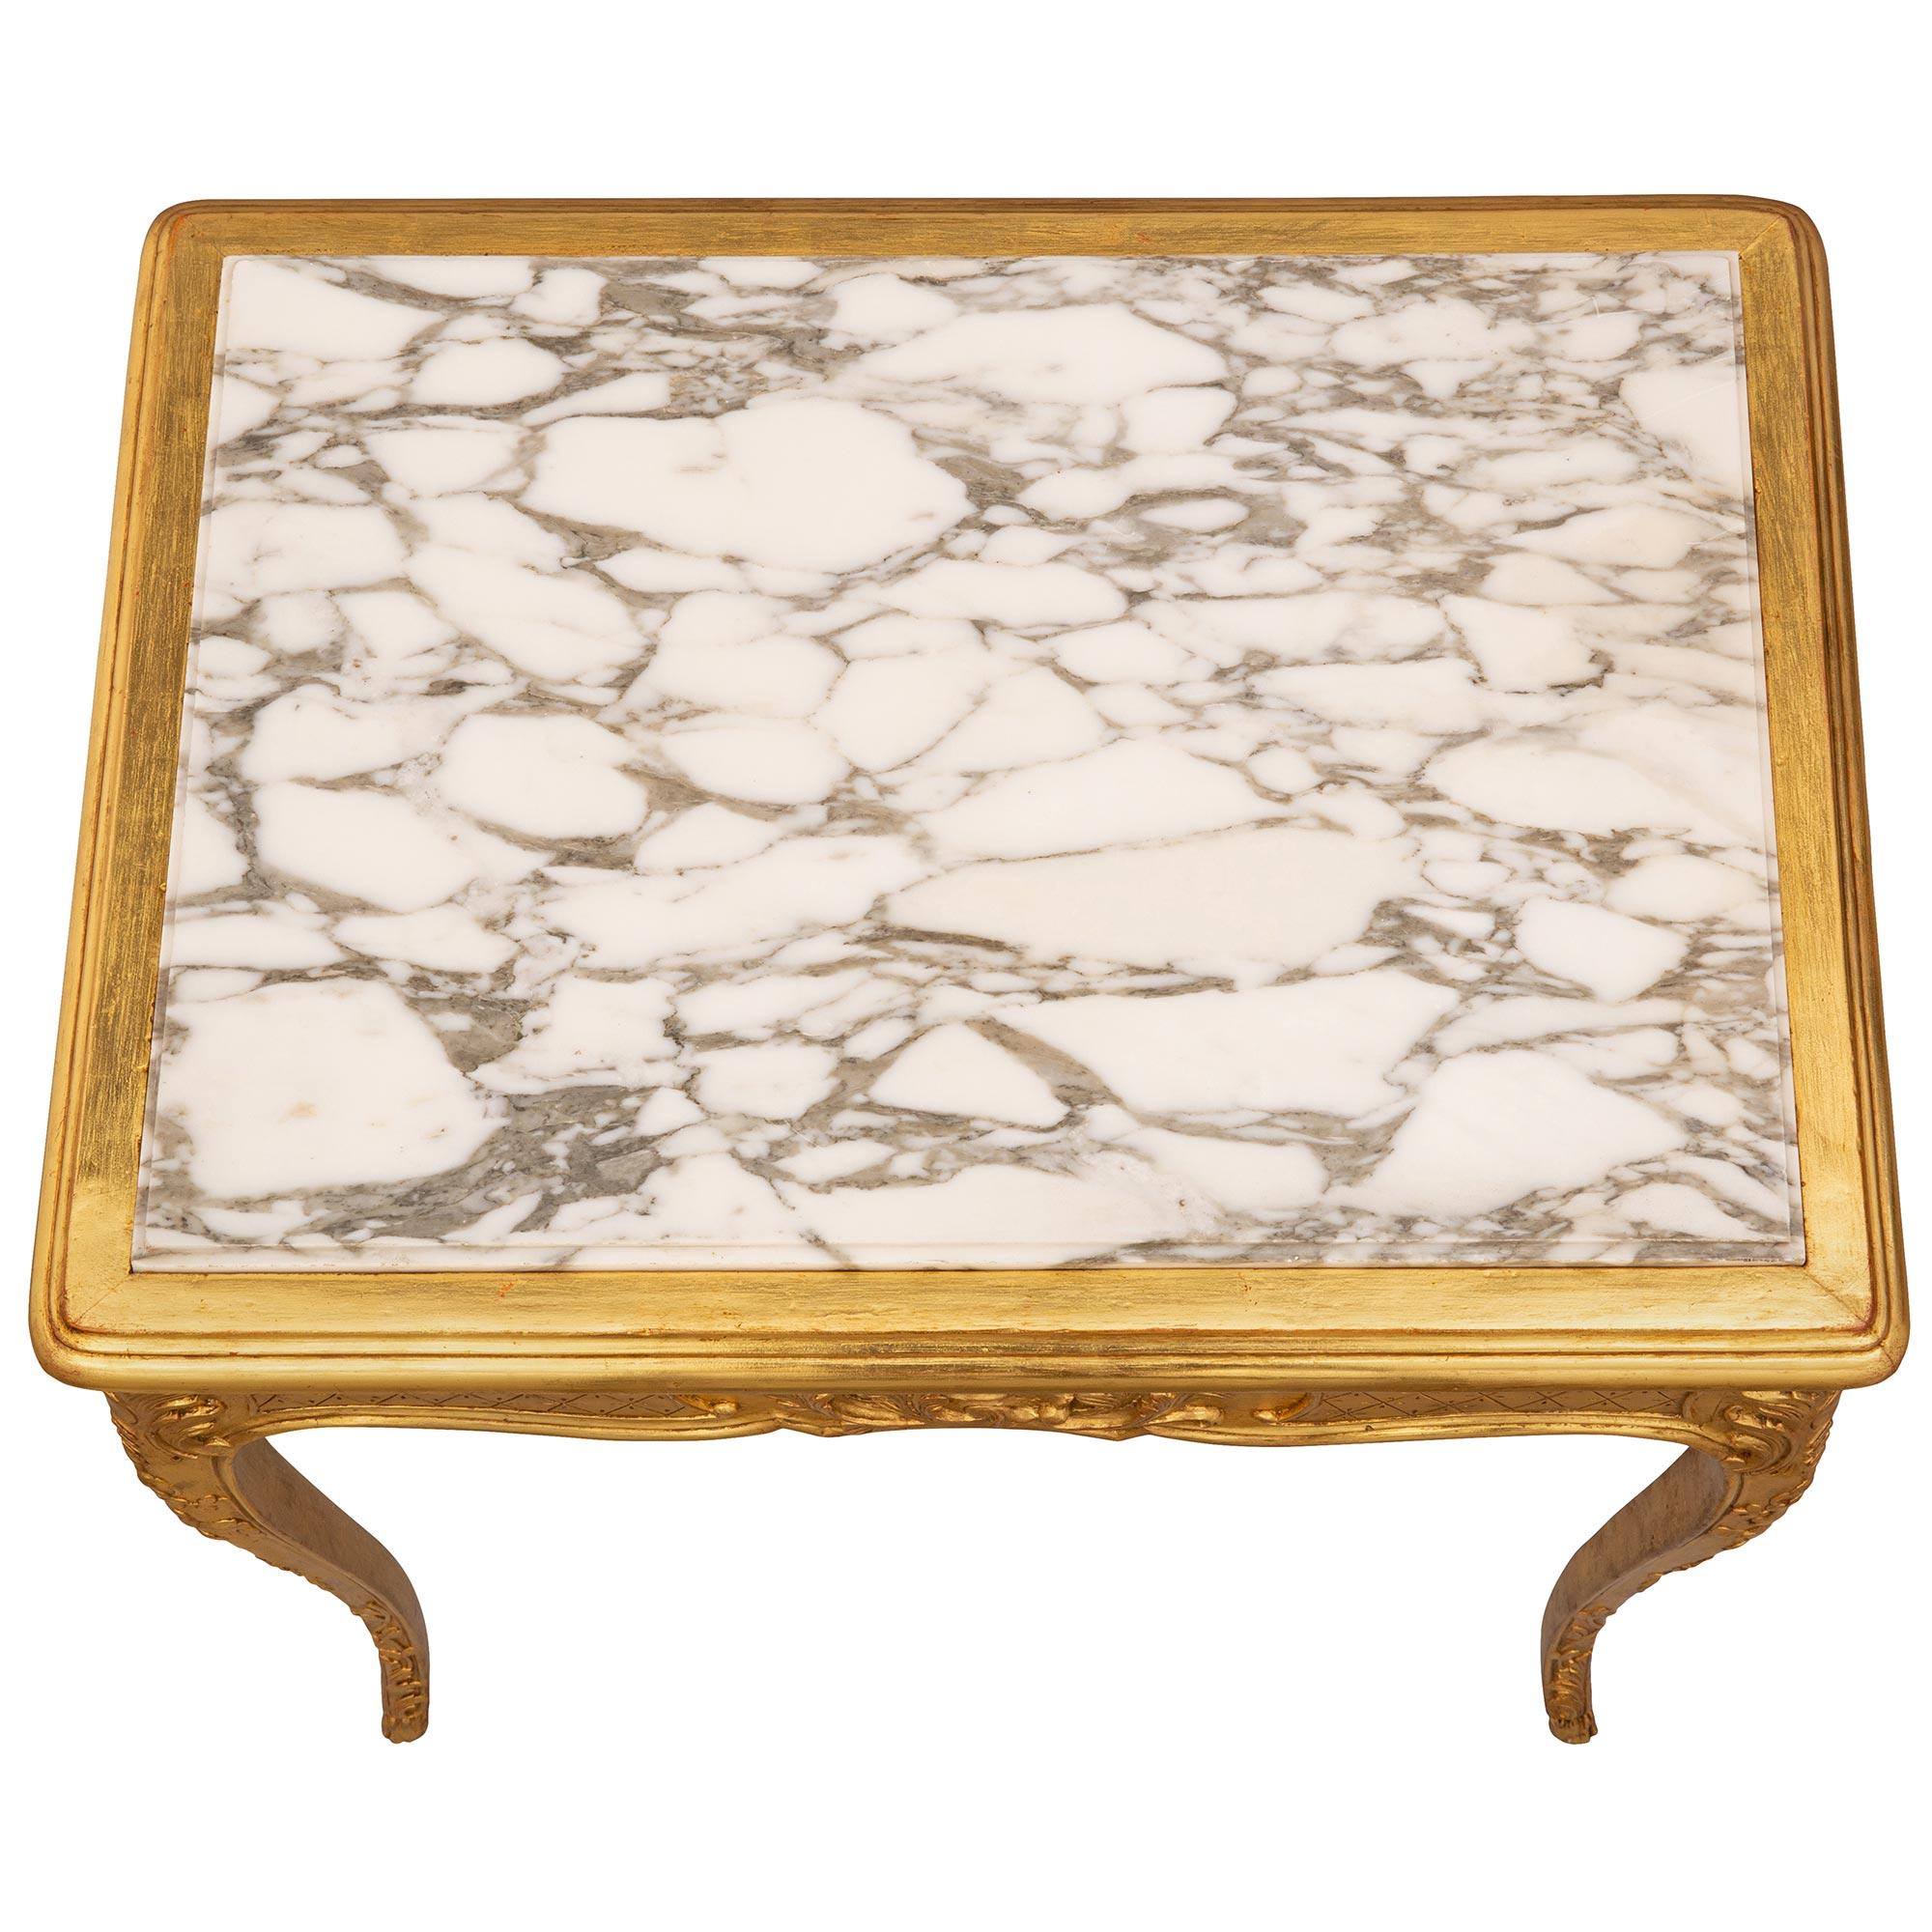 A beautiful and most elegant French 19th century Louis XV st. giltwood and Fleur de Pêcher marble side table. The table is raised by beautiful slender tapered cabriole legs with fine hoof feet and charming carved foliate and floral designs leading